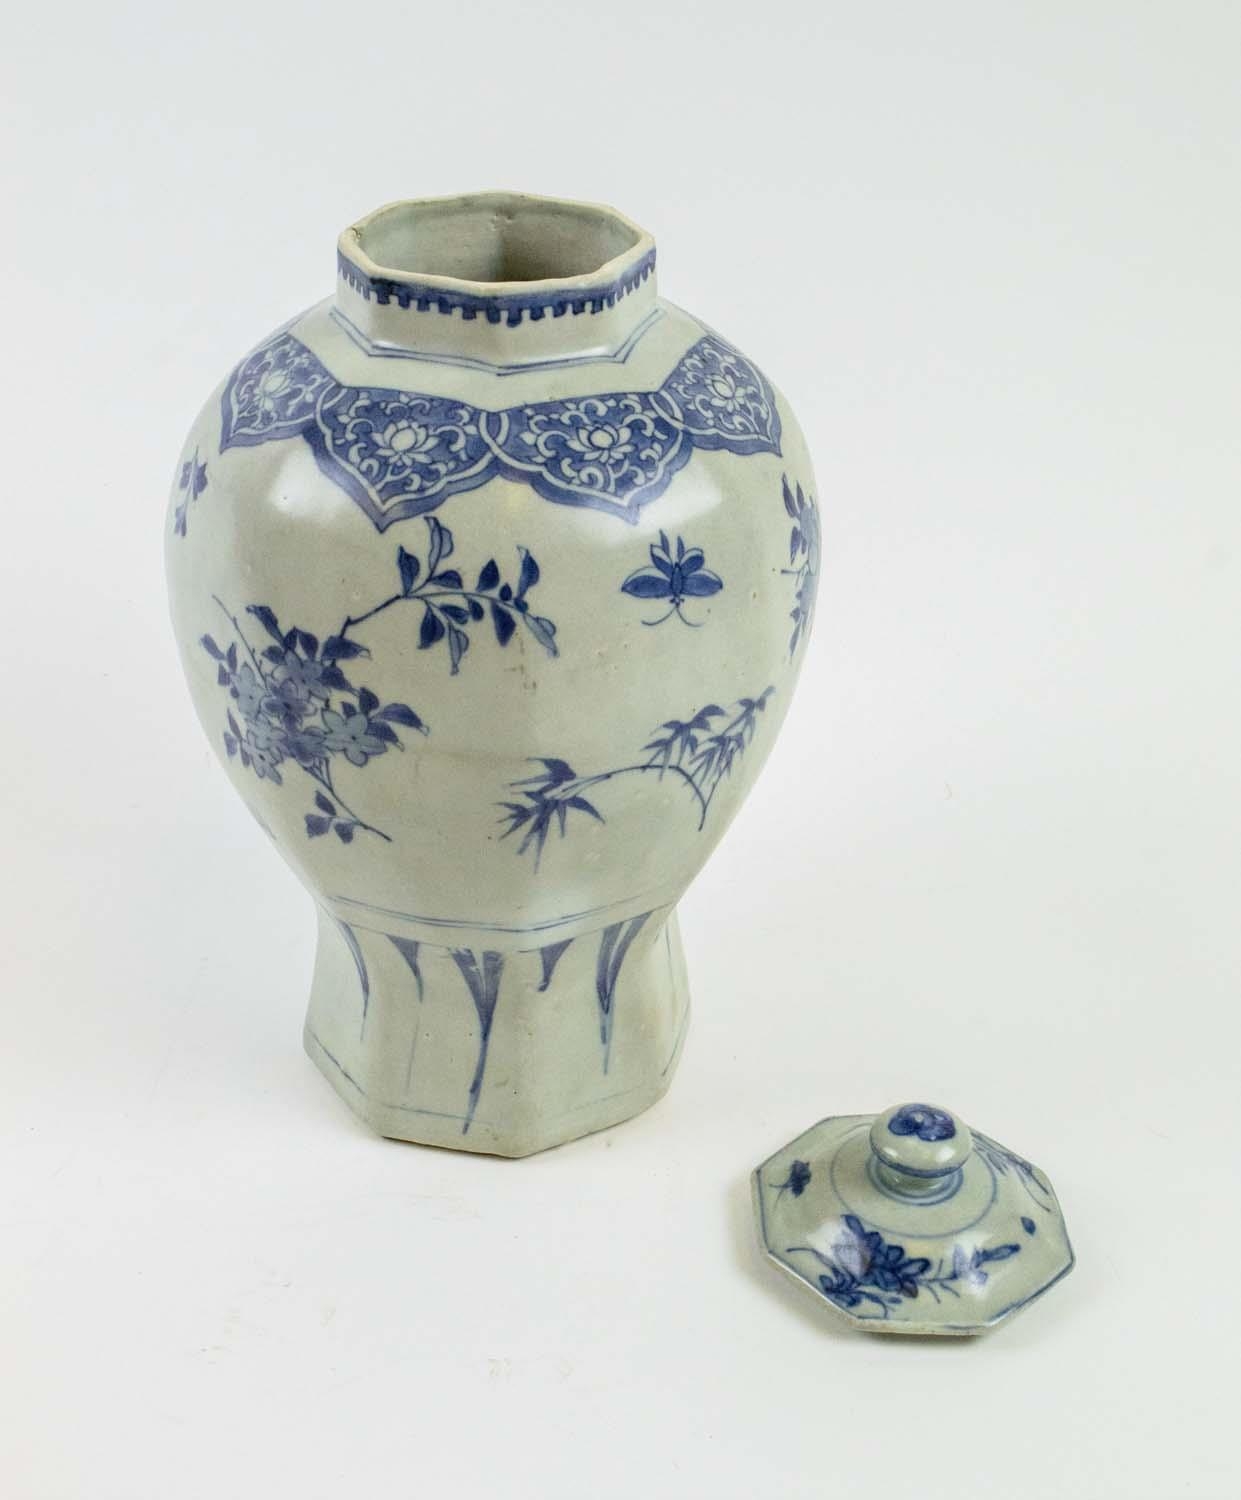 TRANSITIONAL 'HATCHER CARGO' OCTAGONAL BLUE AND WHITE BALUSTER VASE, circa 1640, with lid, decorated - Image 4 of 5